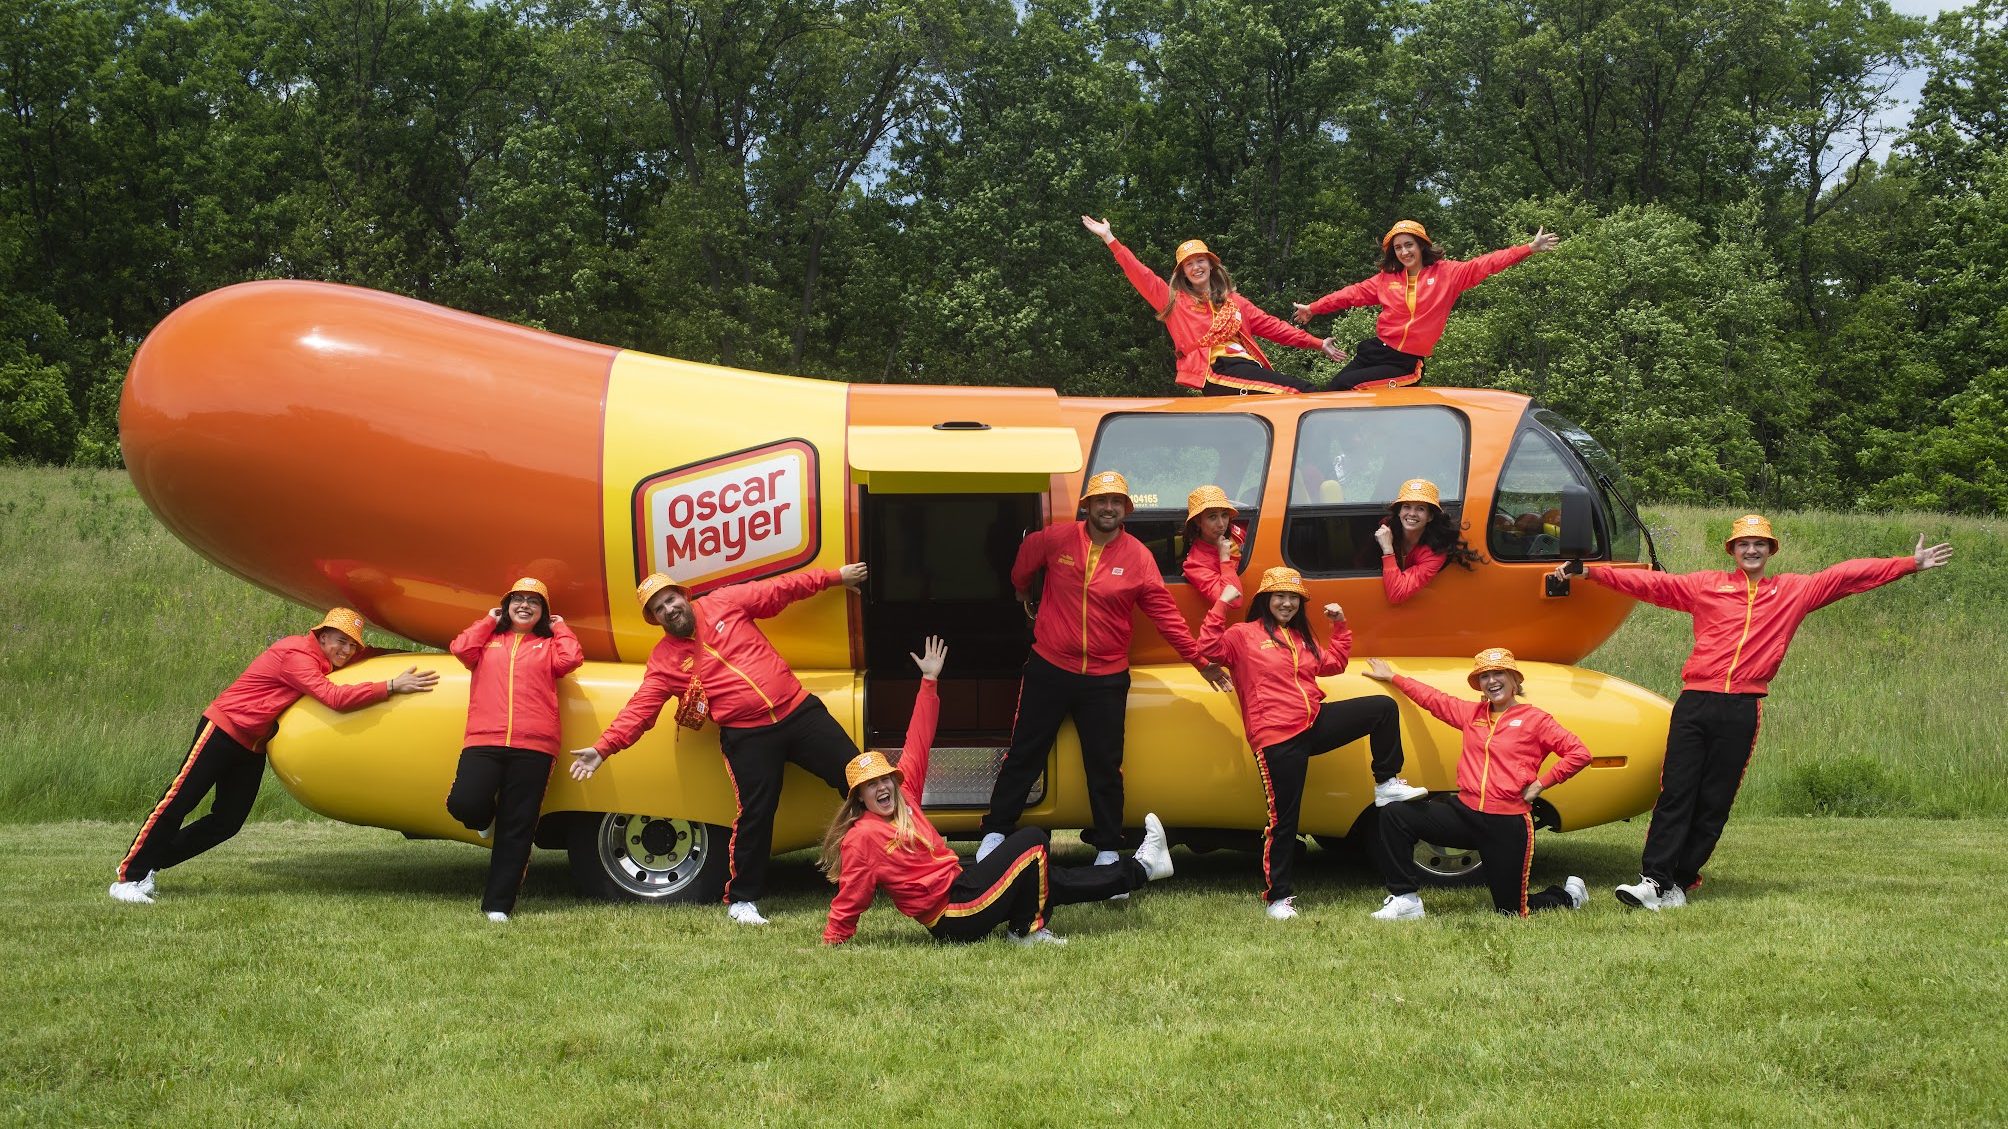 Hotdoggers pose in front of Wienermobile